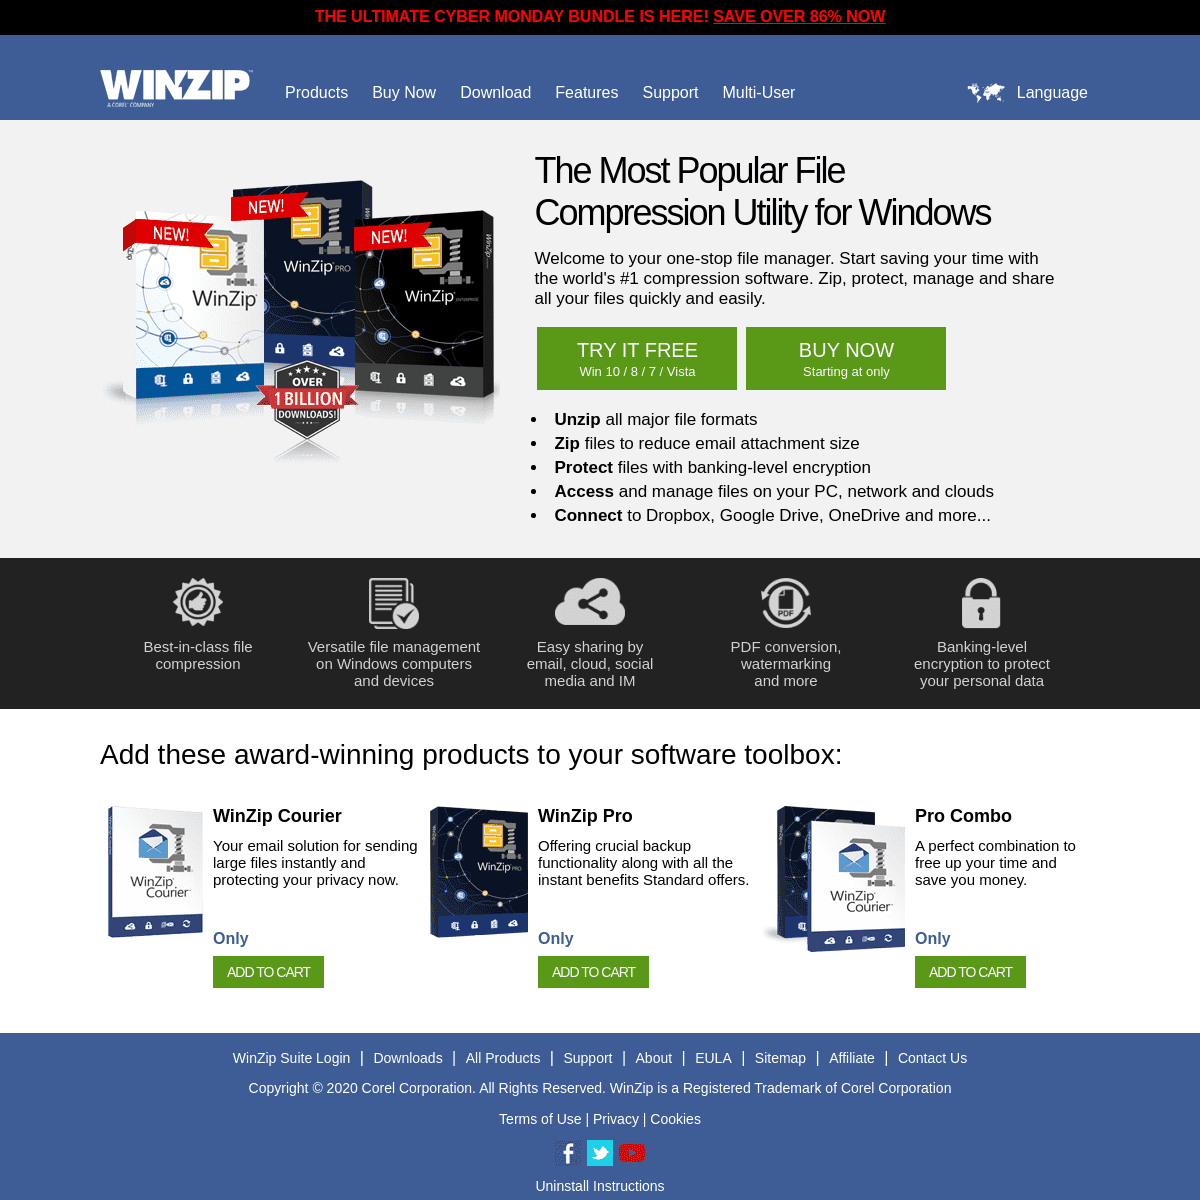 A complete backup of winzip.com